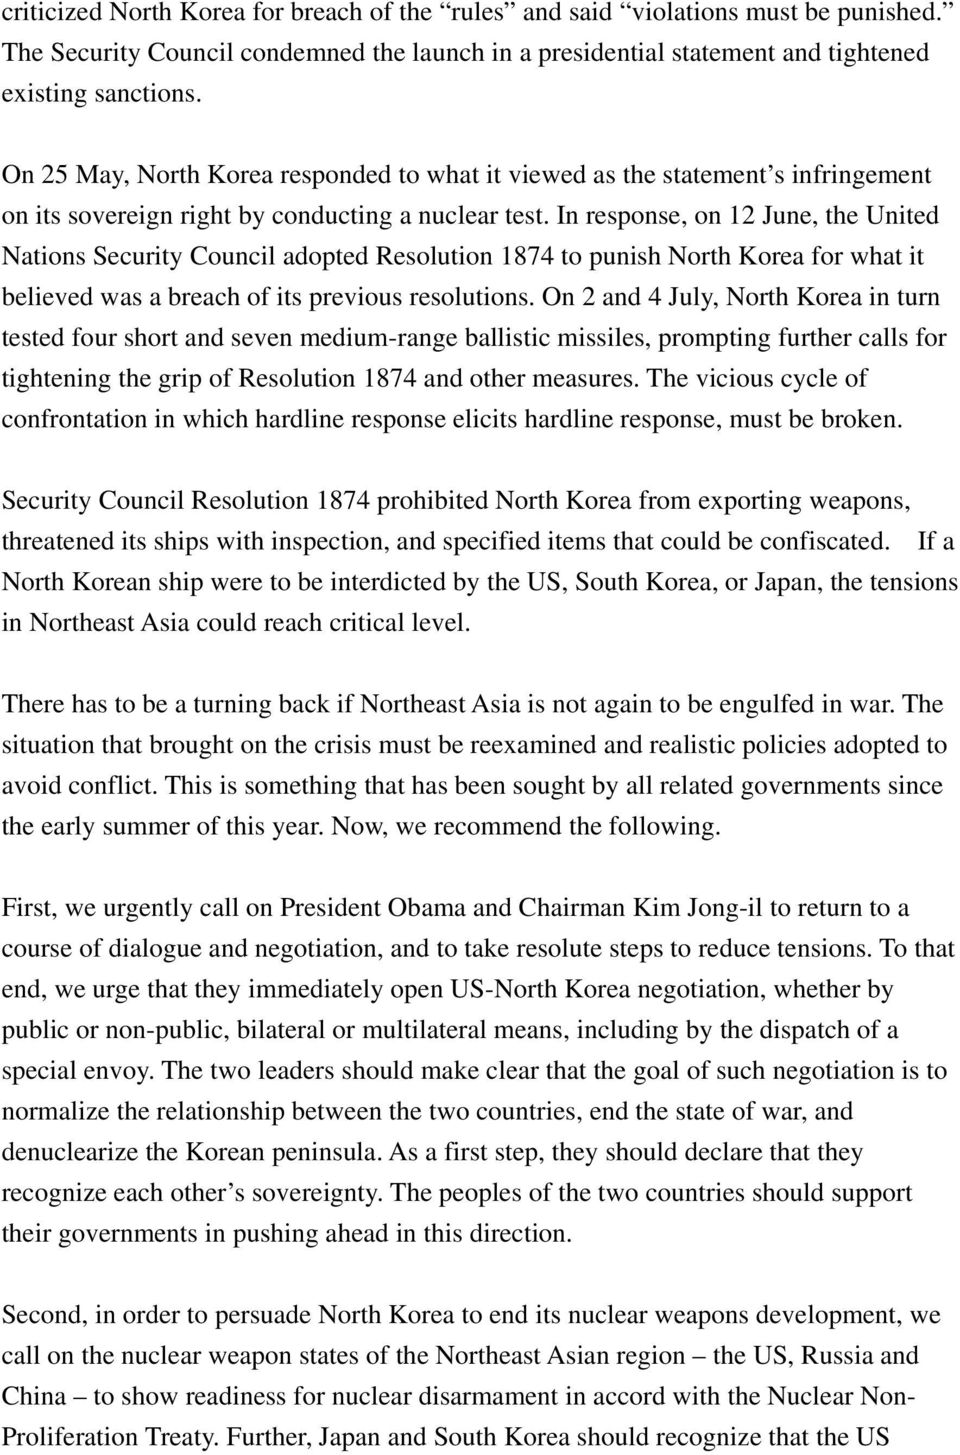 In response, on 12 June, the United Nations Security Council adopted Resolution 1874 to punish North Korea for what it believed was a breach of its previous resolutions.